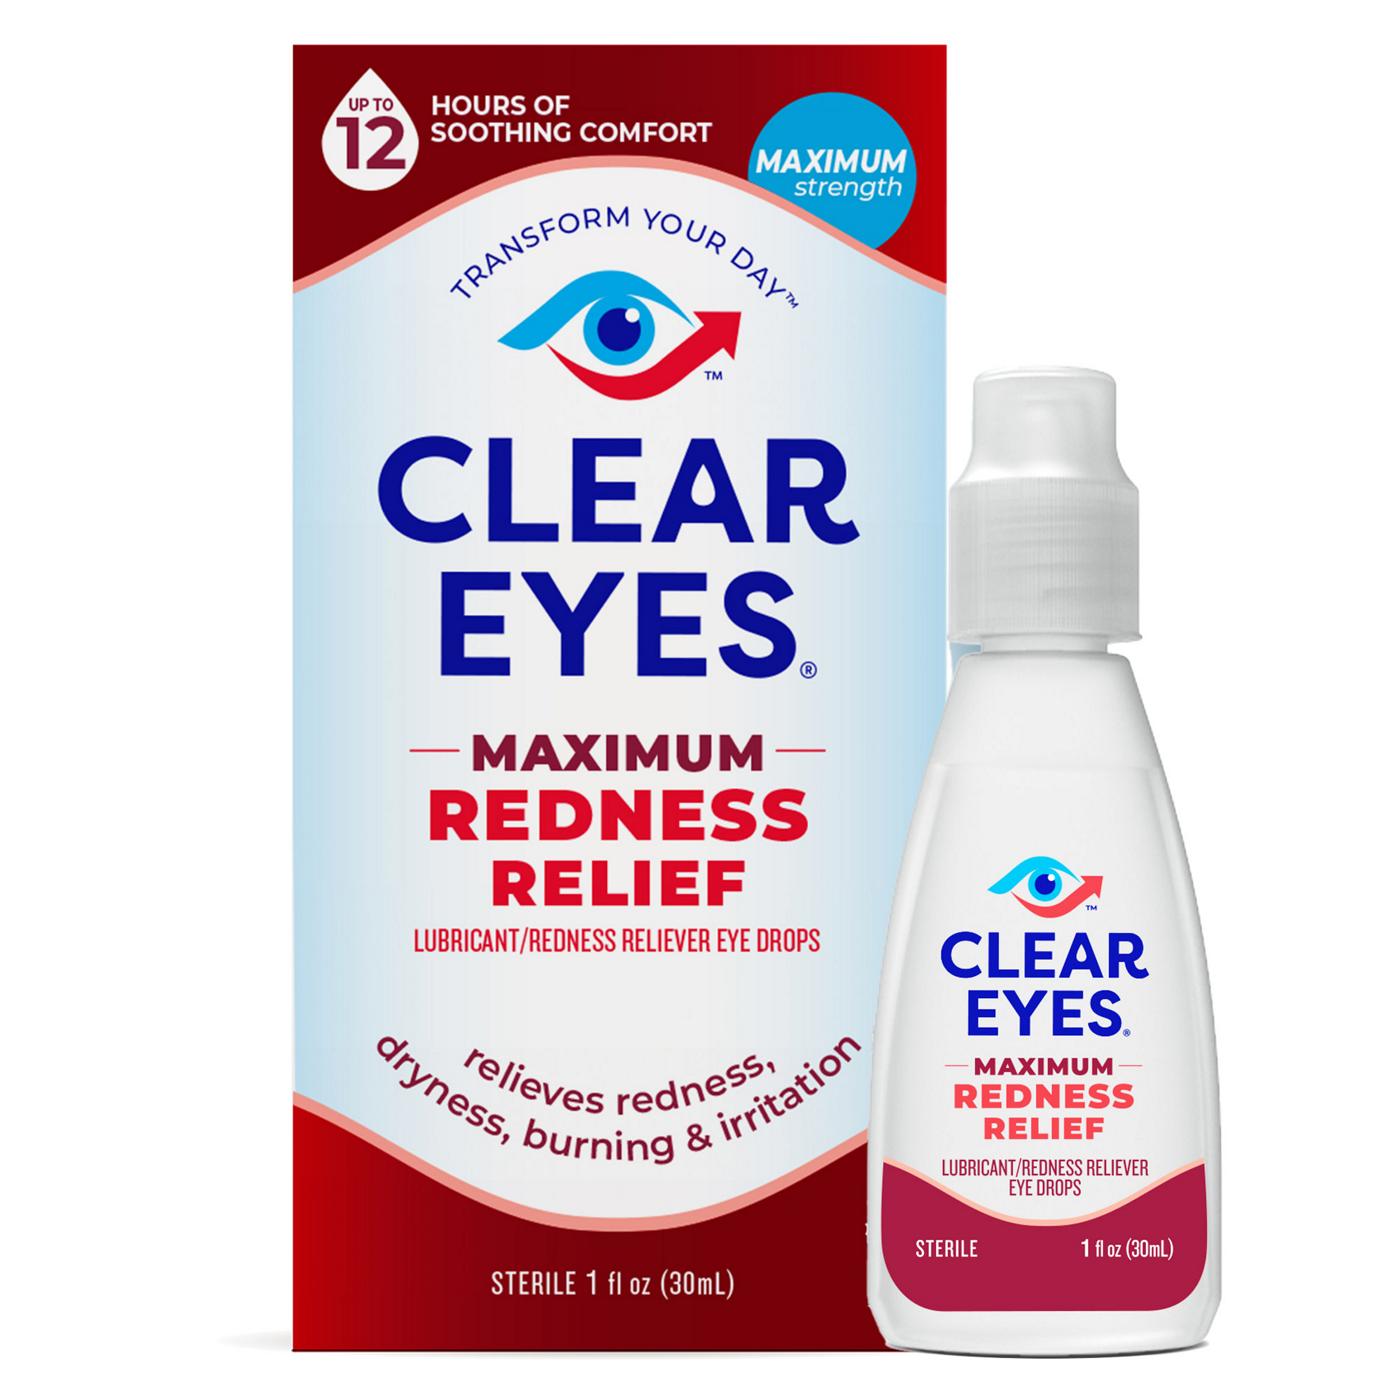 Clear Eyes Eye Drops, Max Redness Relief; image 2 of 3